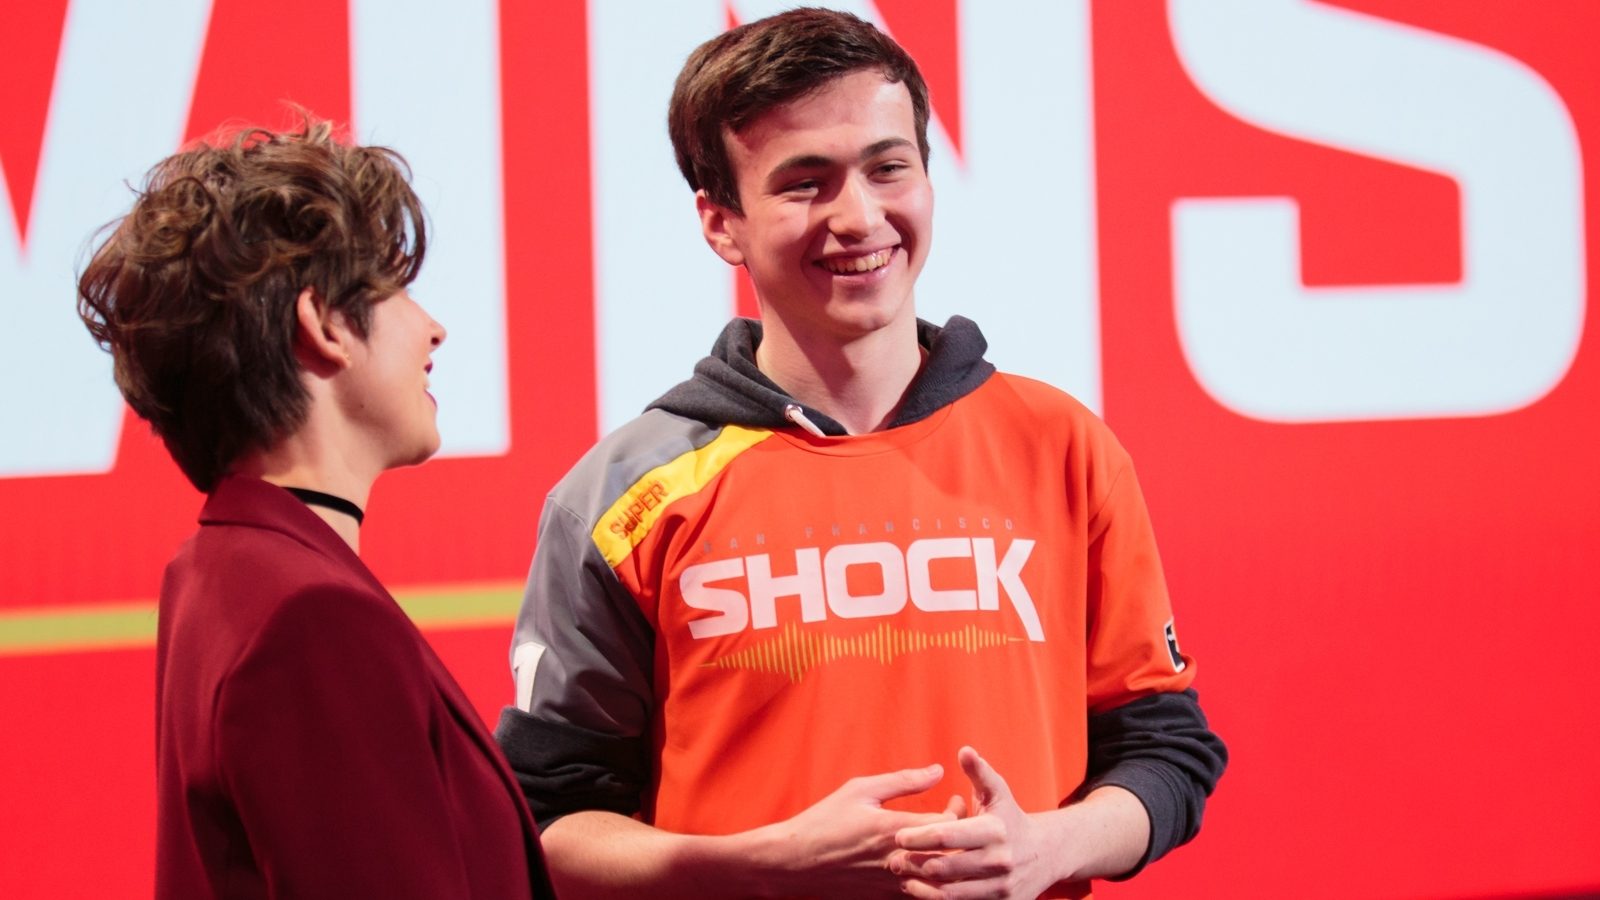 The Shock smash records in Week 25 of the Overwatch League